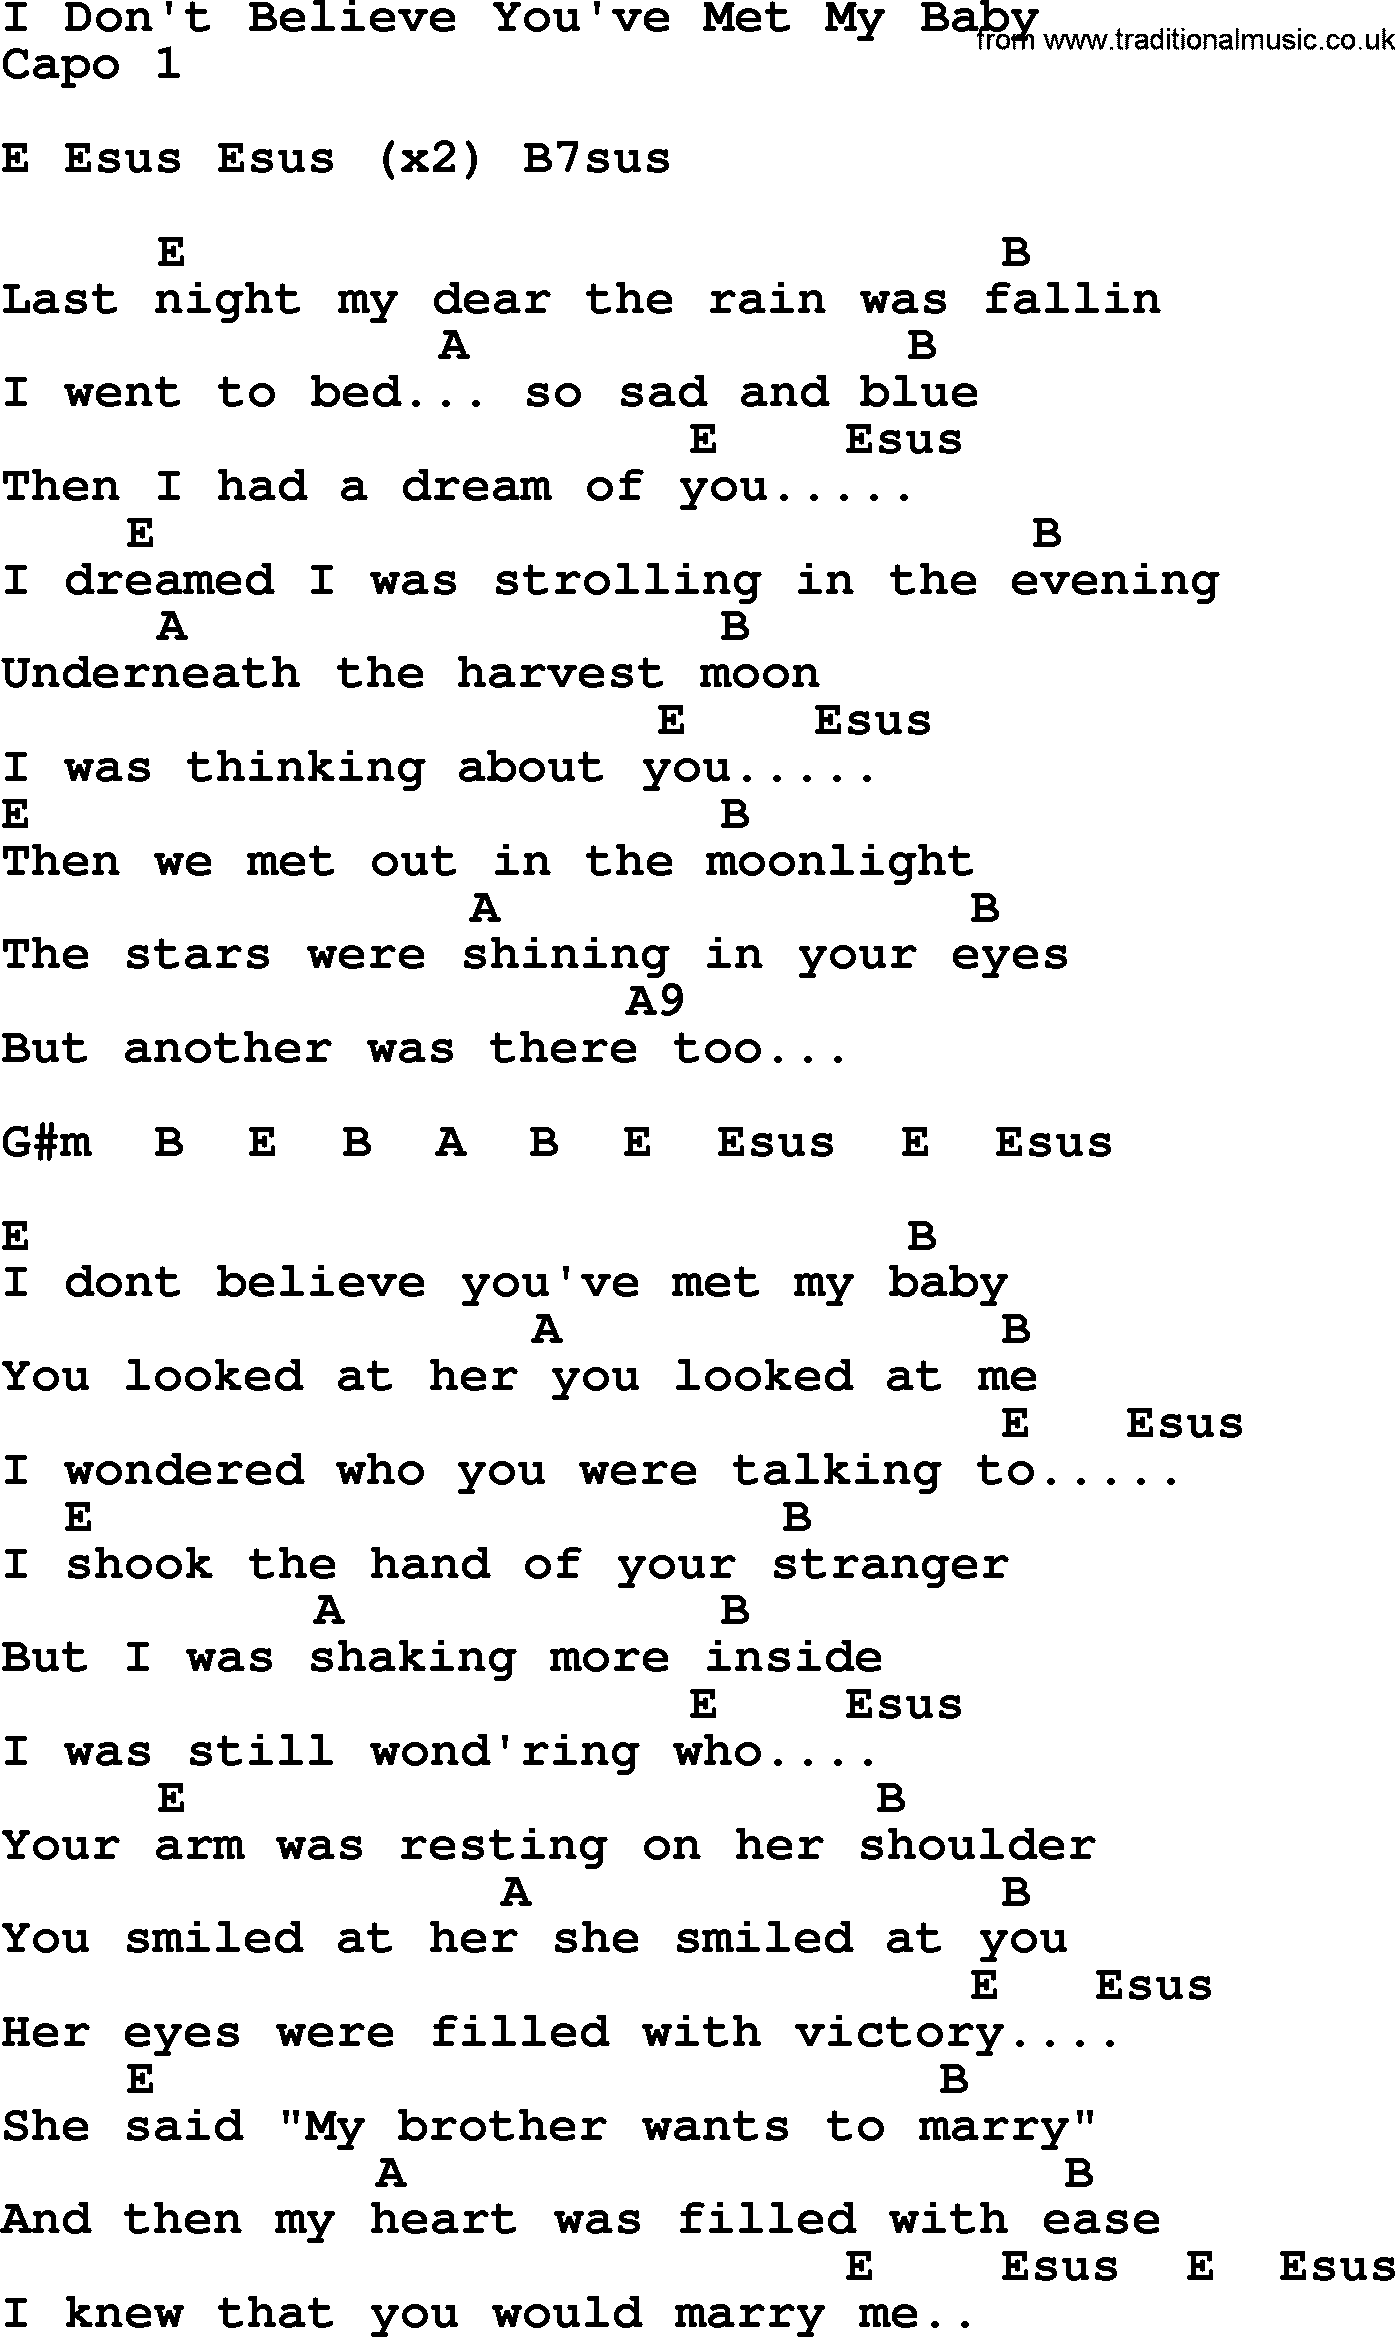 Bluegrass song: I Don't Believe You've Met My Baby, lyrics and chords